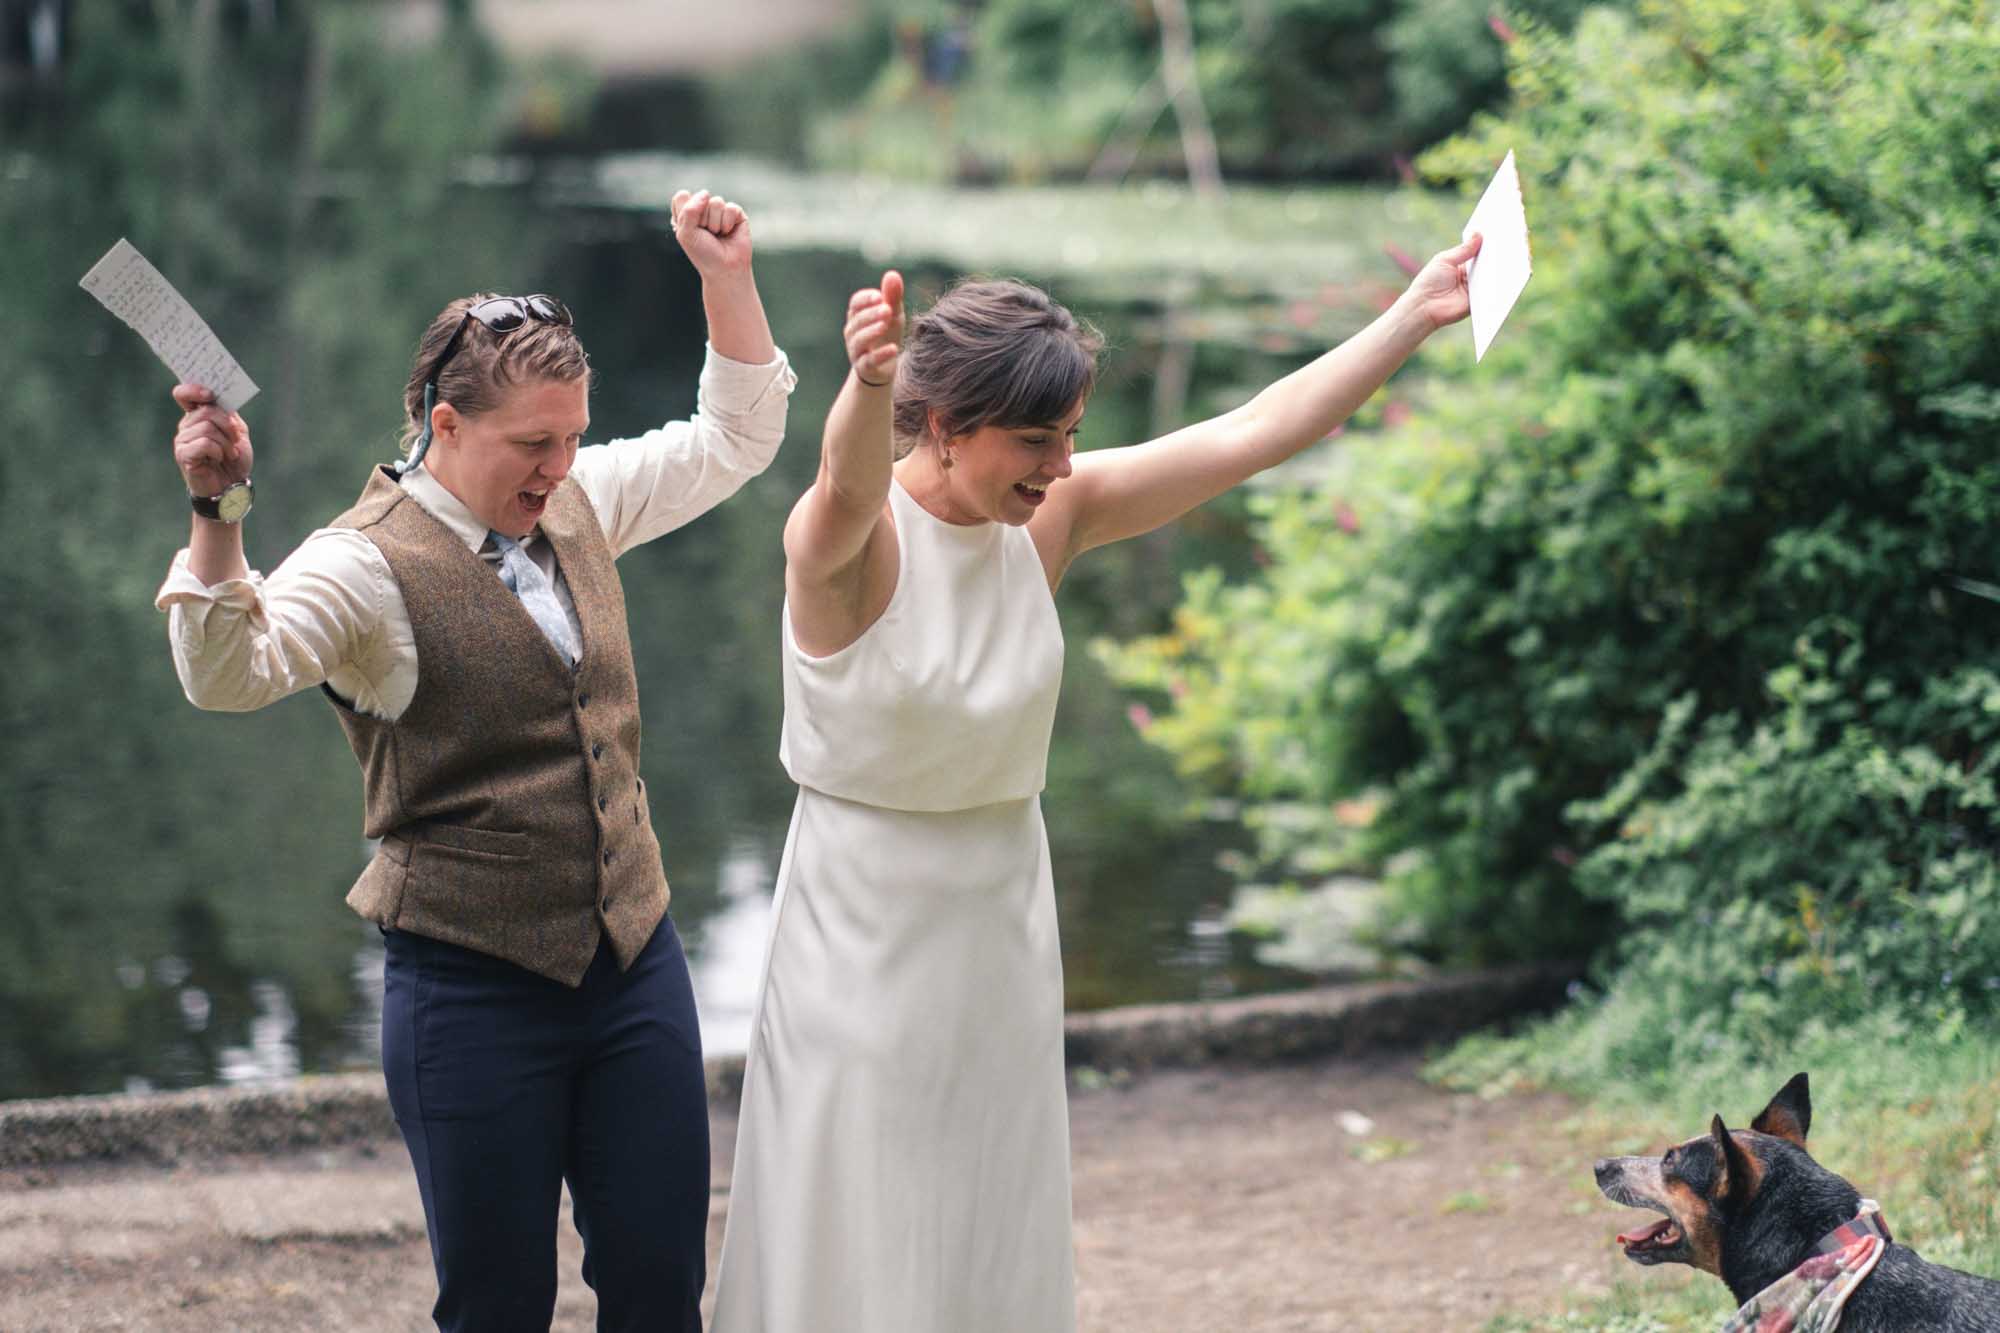 Yard Games, Dogs, and Homemade Pies At This Laid Back, DIY Washington Wedding | Best Northwest Photography | Featured on Equally Wed, the leading LGBTQ+ wedding magazine